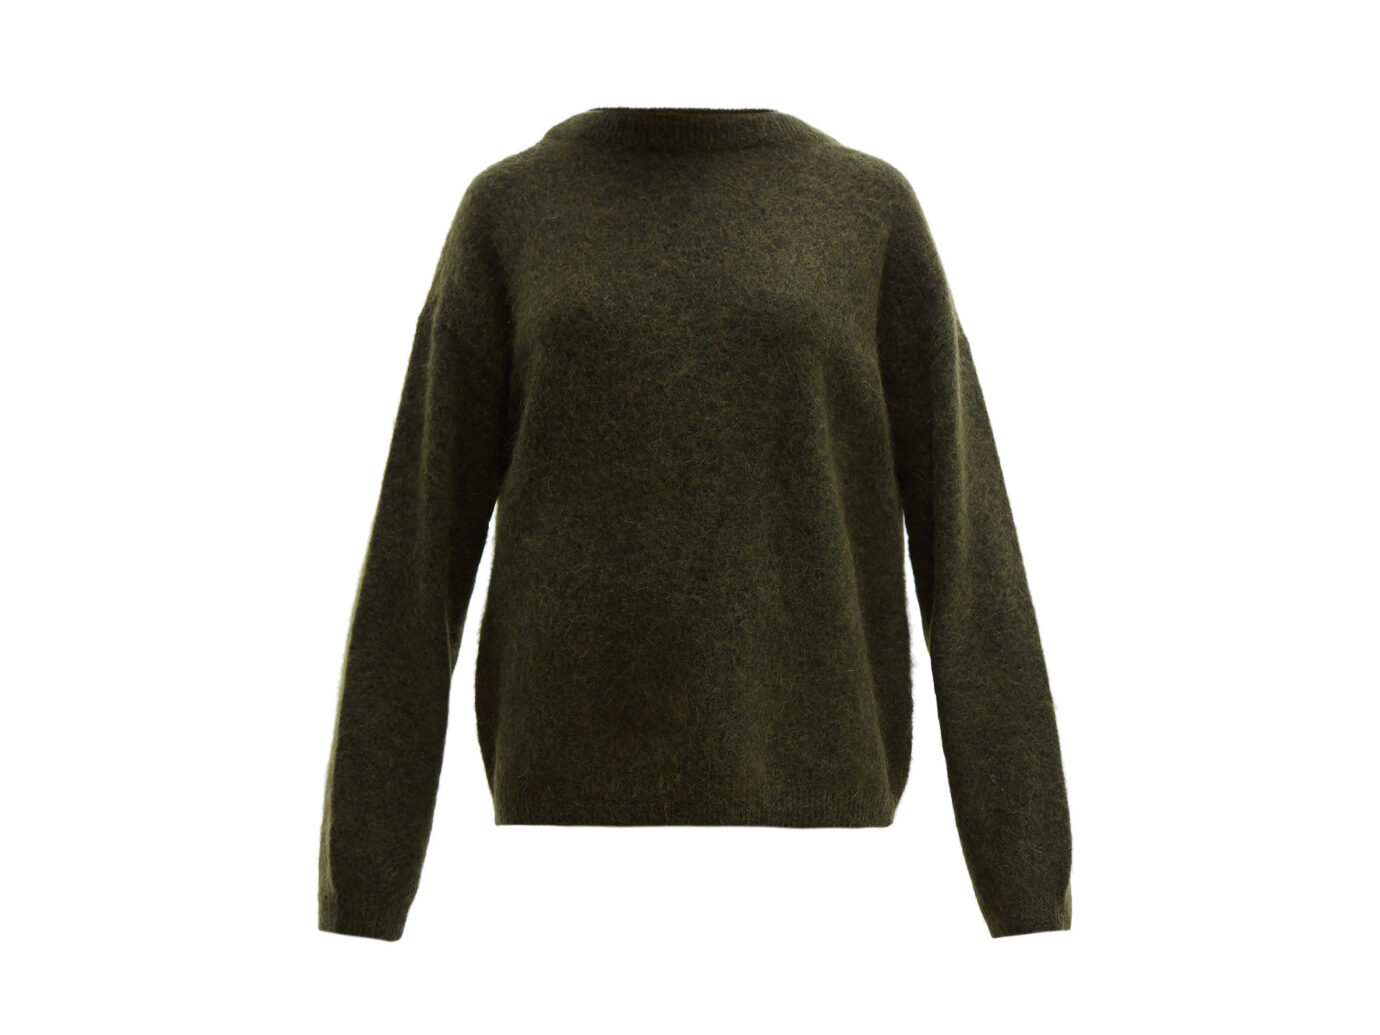 Acne Studios Oversized Knitted Sweater